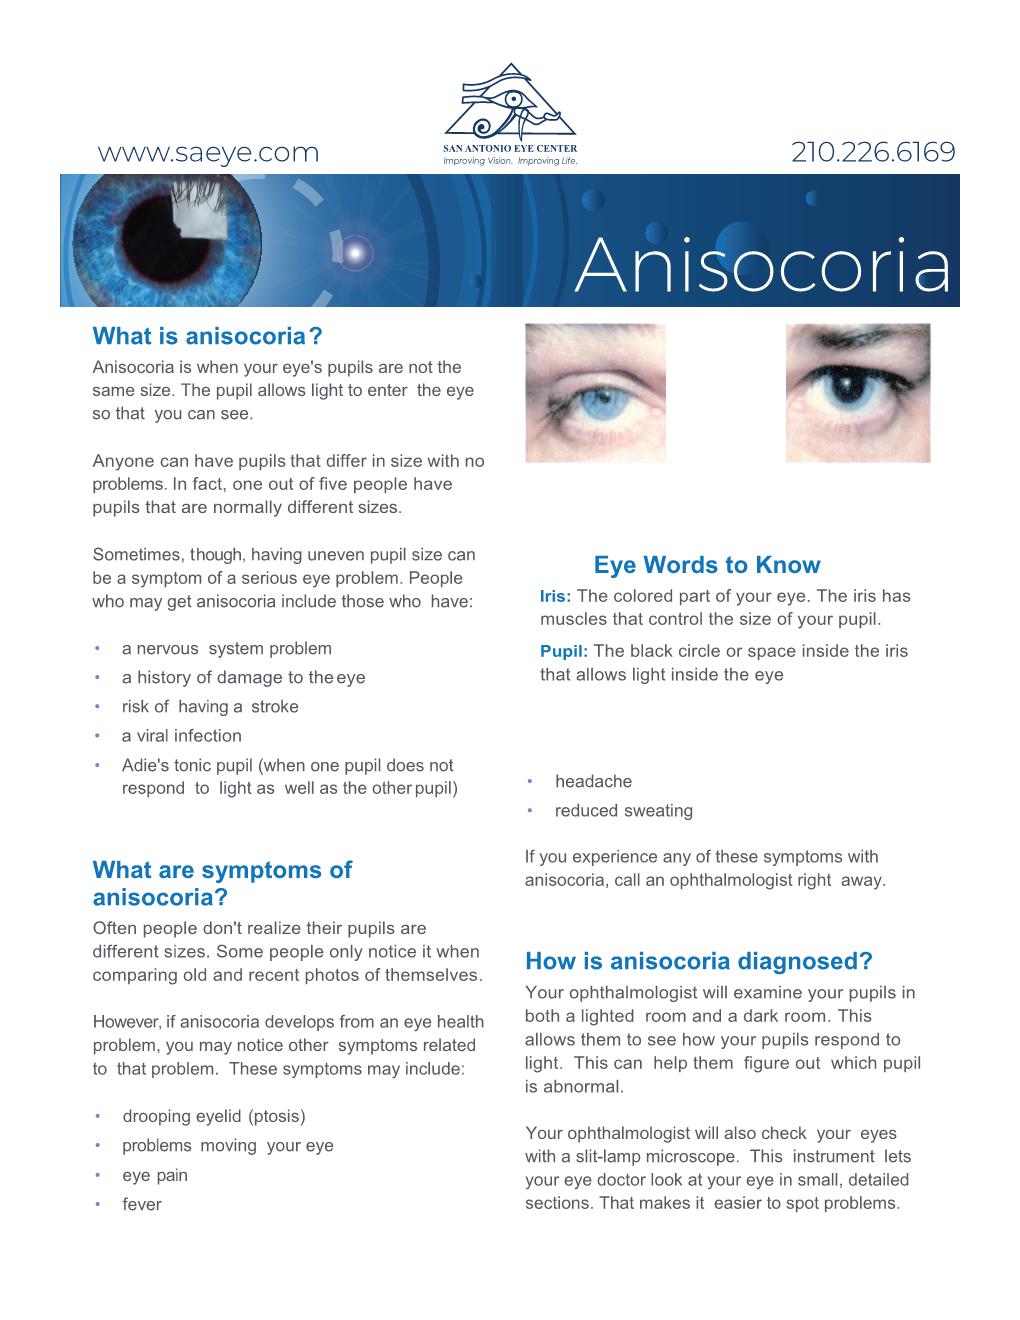 Anisocoria What Is Anisocoria? Anisocoria Is When Your Eye's Pupils Are Not the Same Size